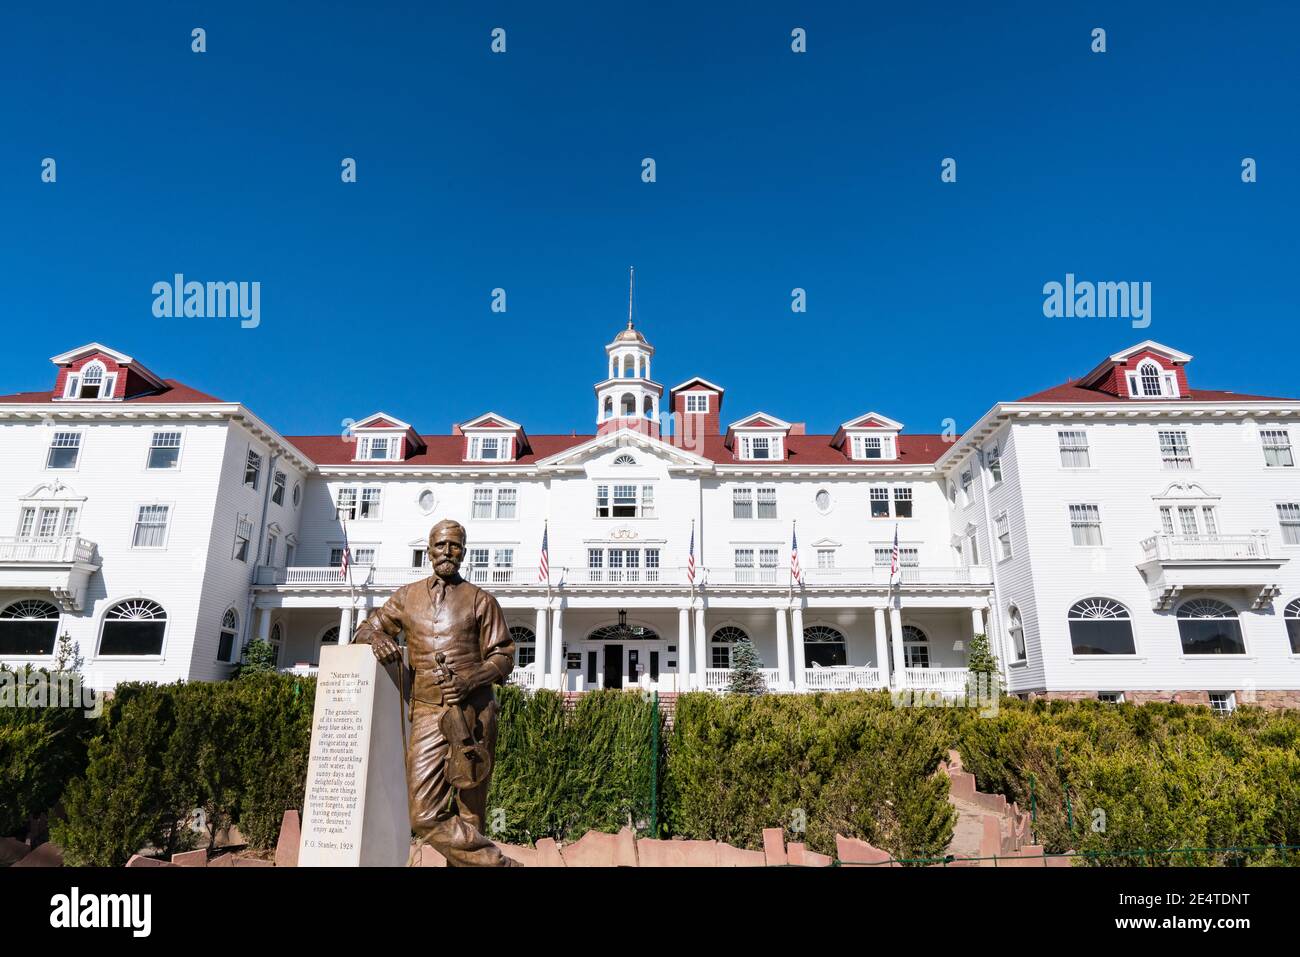 Estes Park, CO - October 31, 2020: Exterior of the historic Staley Hotel in Estes Park near Rocky Mountain National Park with statue of F. E. Stanley Stock Photo